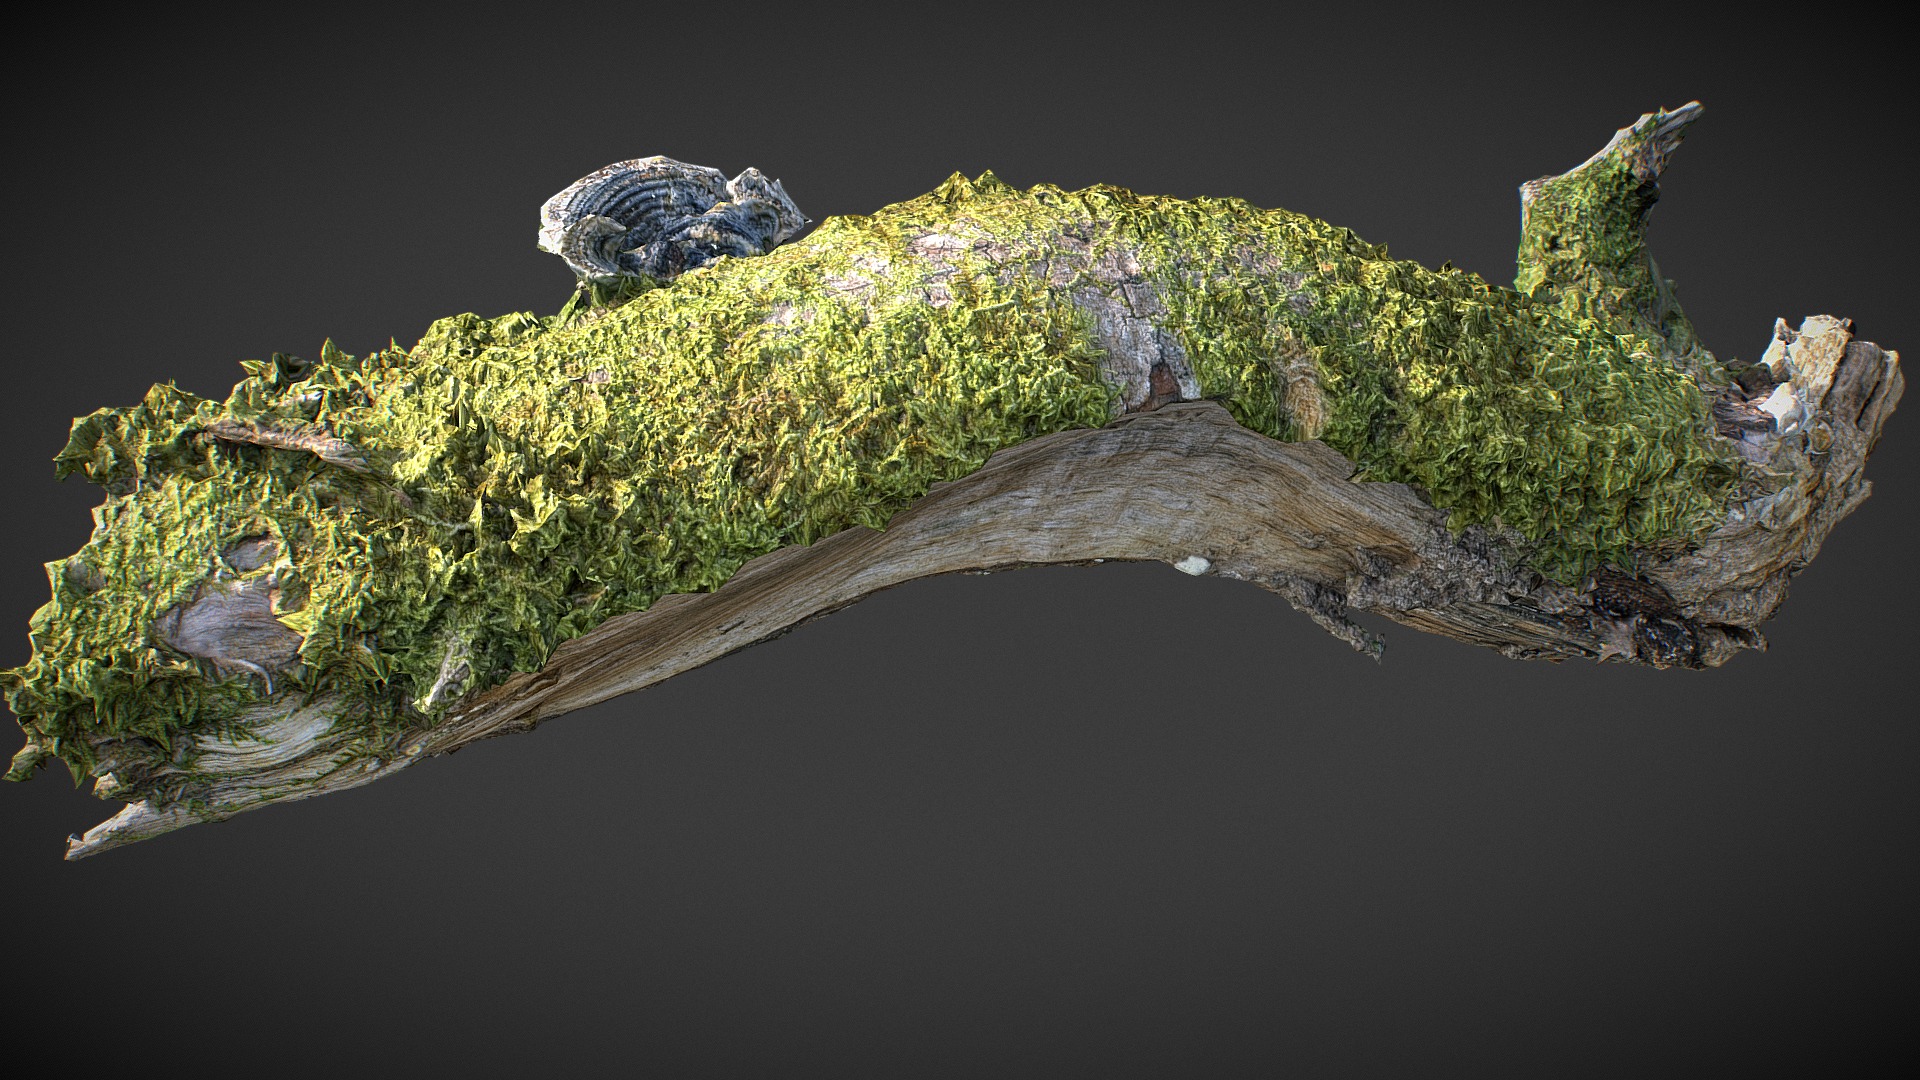 3D model Mushrooms Wood 04 - This is a 3D model of the Mushrooms Wood 04. The 3D model is about a tree branch with moss growing on it.